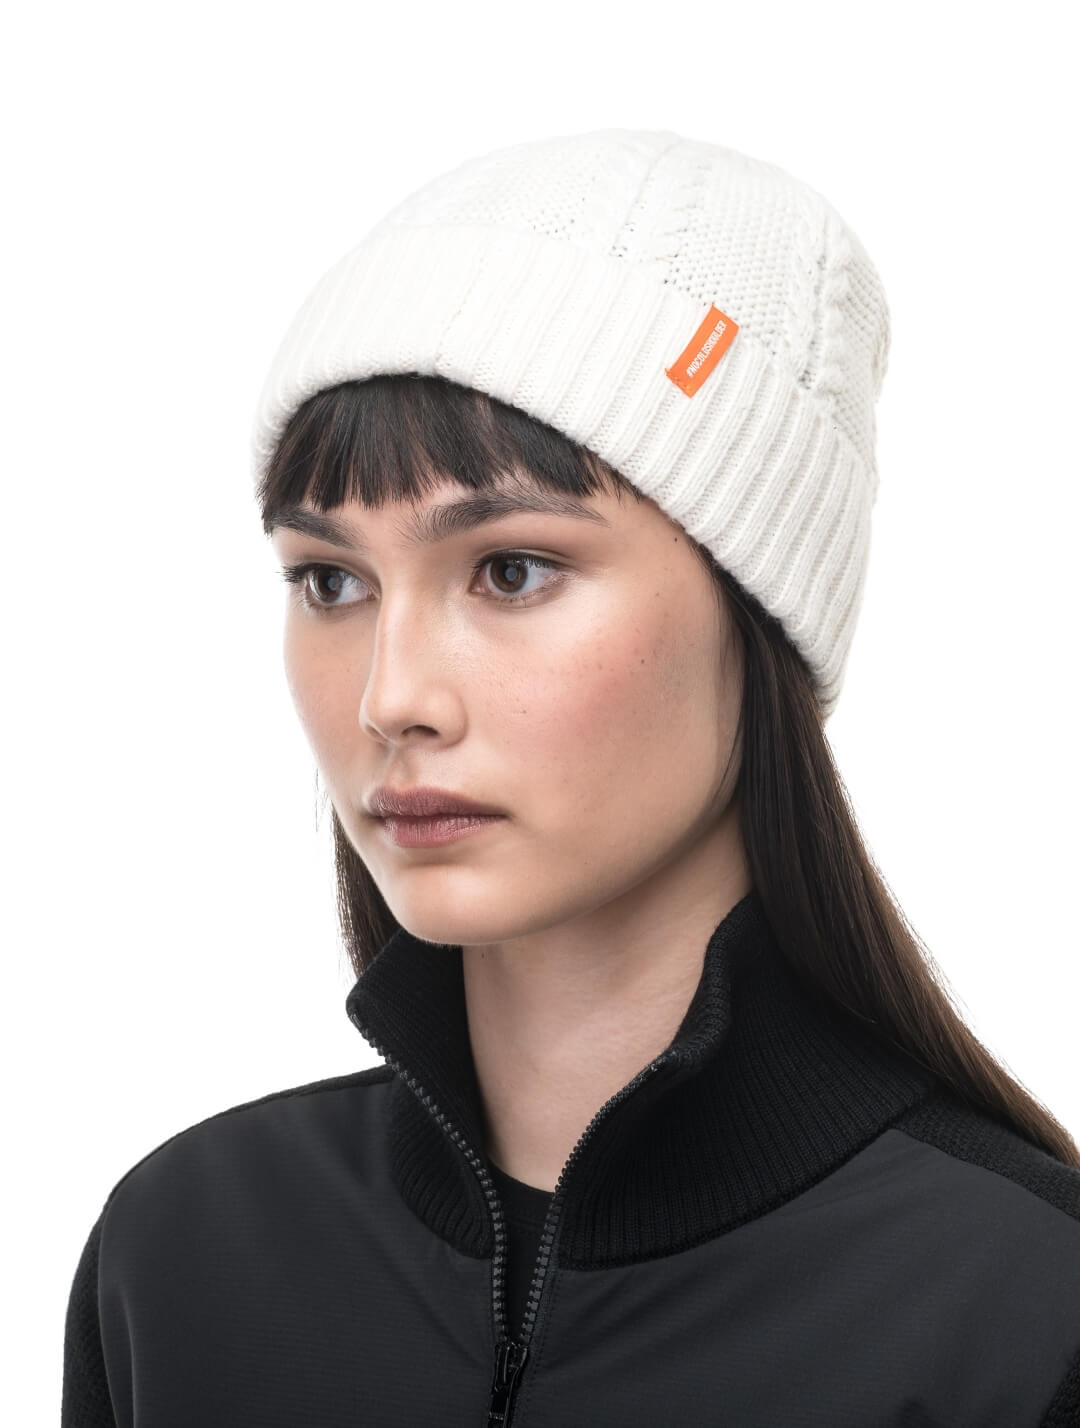 No Cold Shoulder unisex beanie with cable stitched crown, two by two rib knit cuff, with dual orange wrap labels along cuff, in Chalk